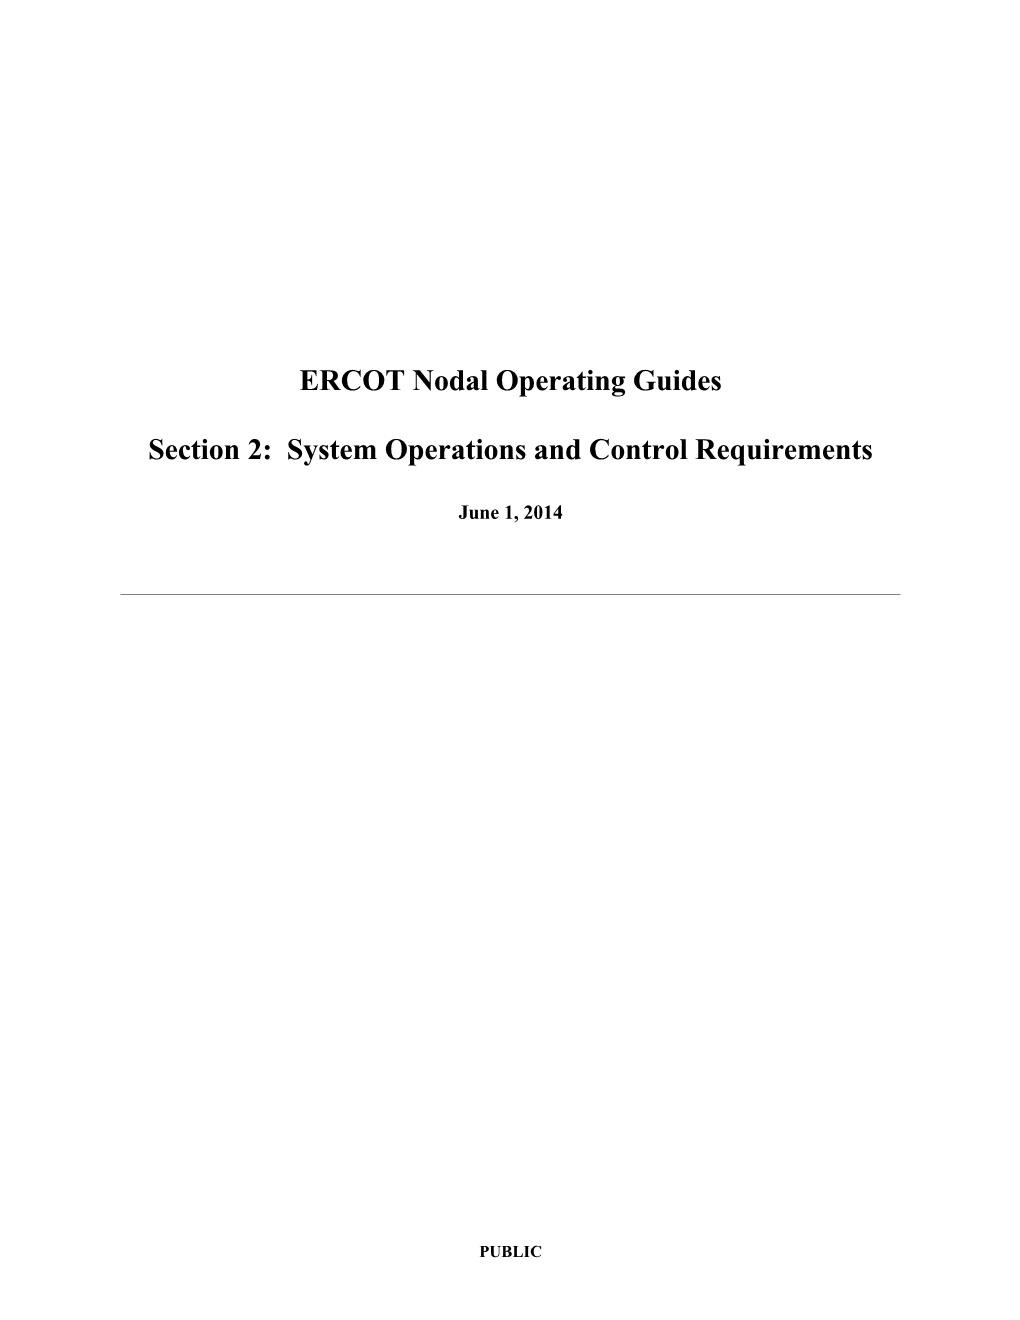 ERCOT ISO Operation